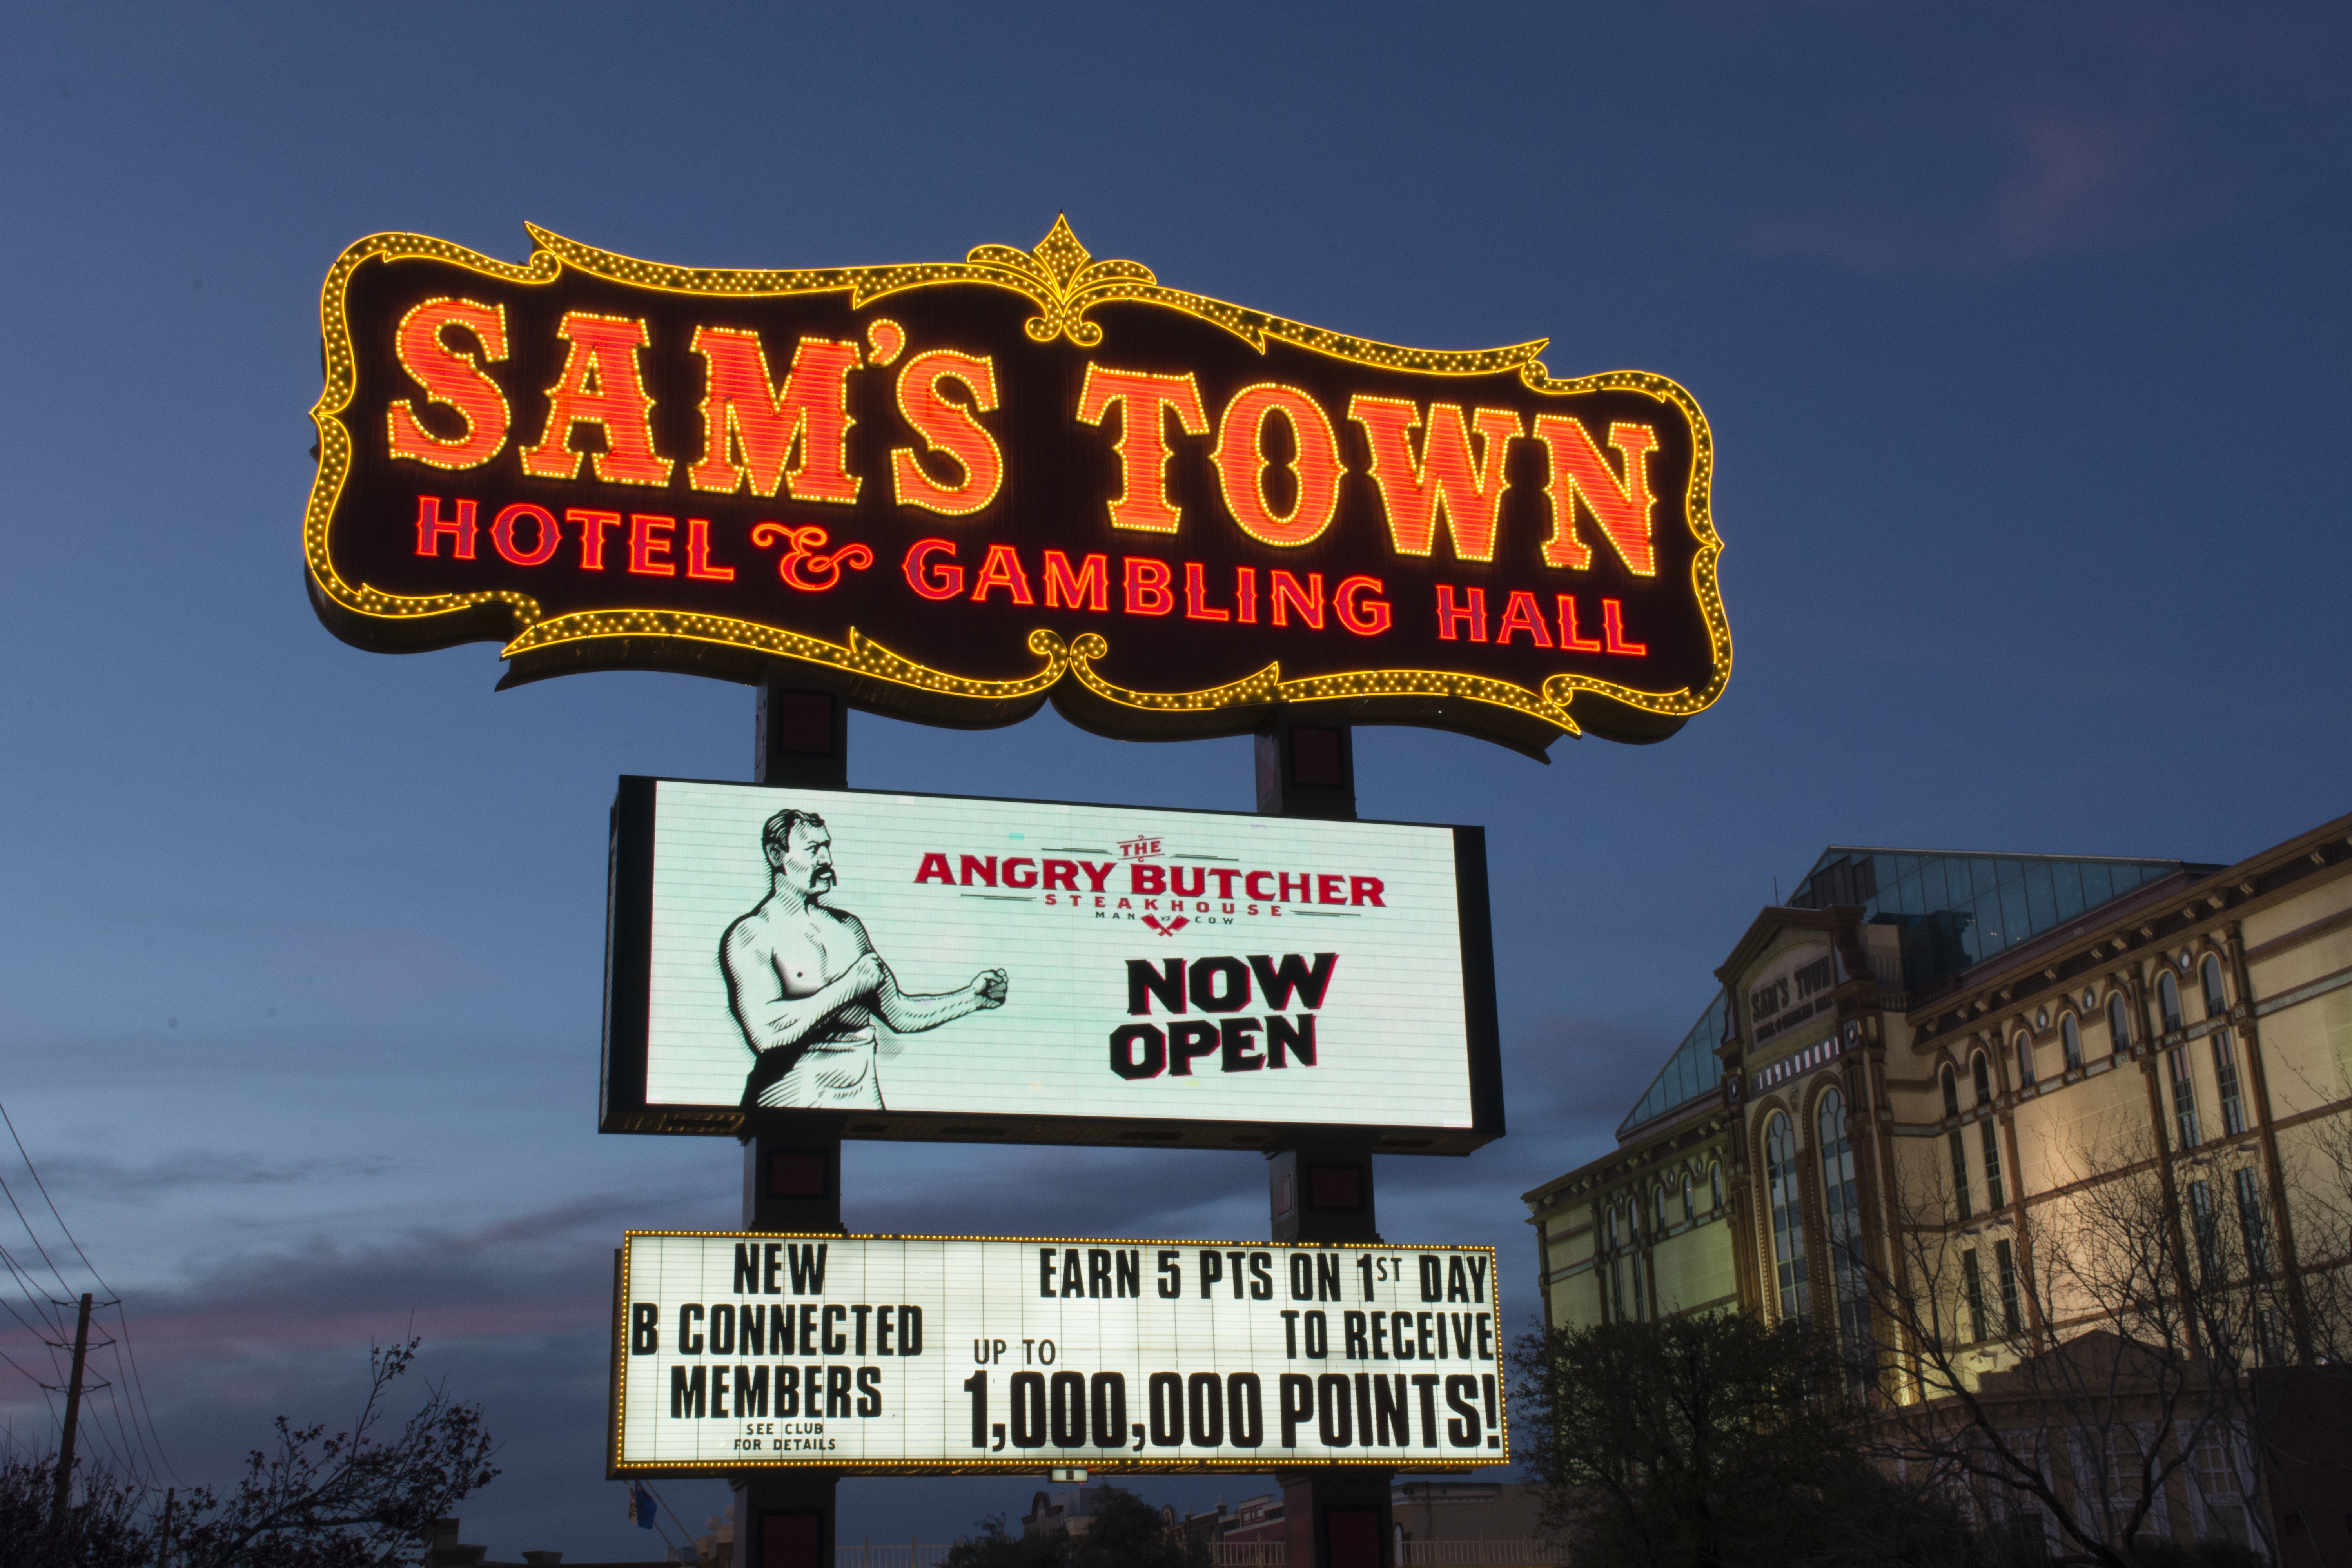 Photographs of Sam's Town sign, Las Vegas (Nev.), March 7, 2017